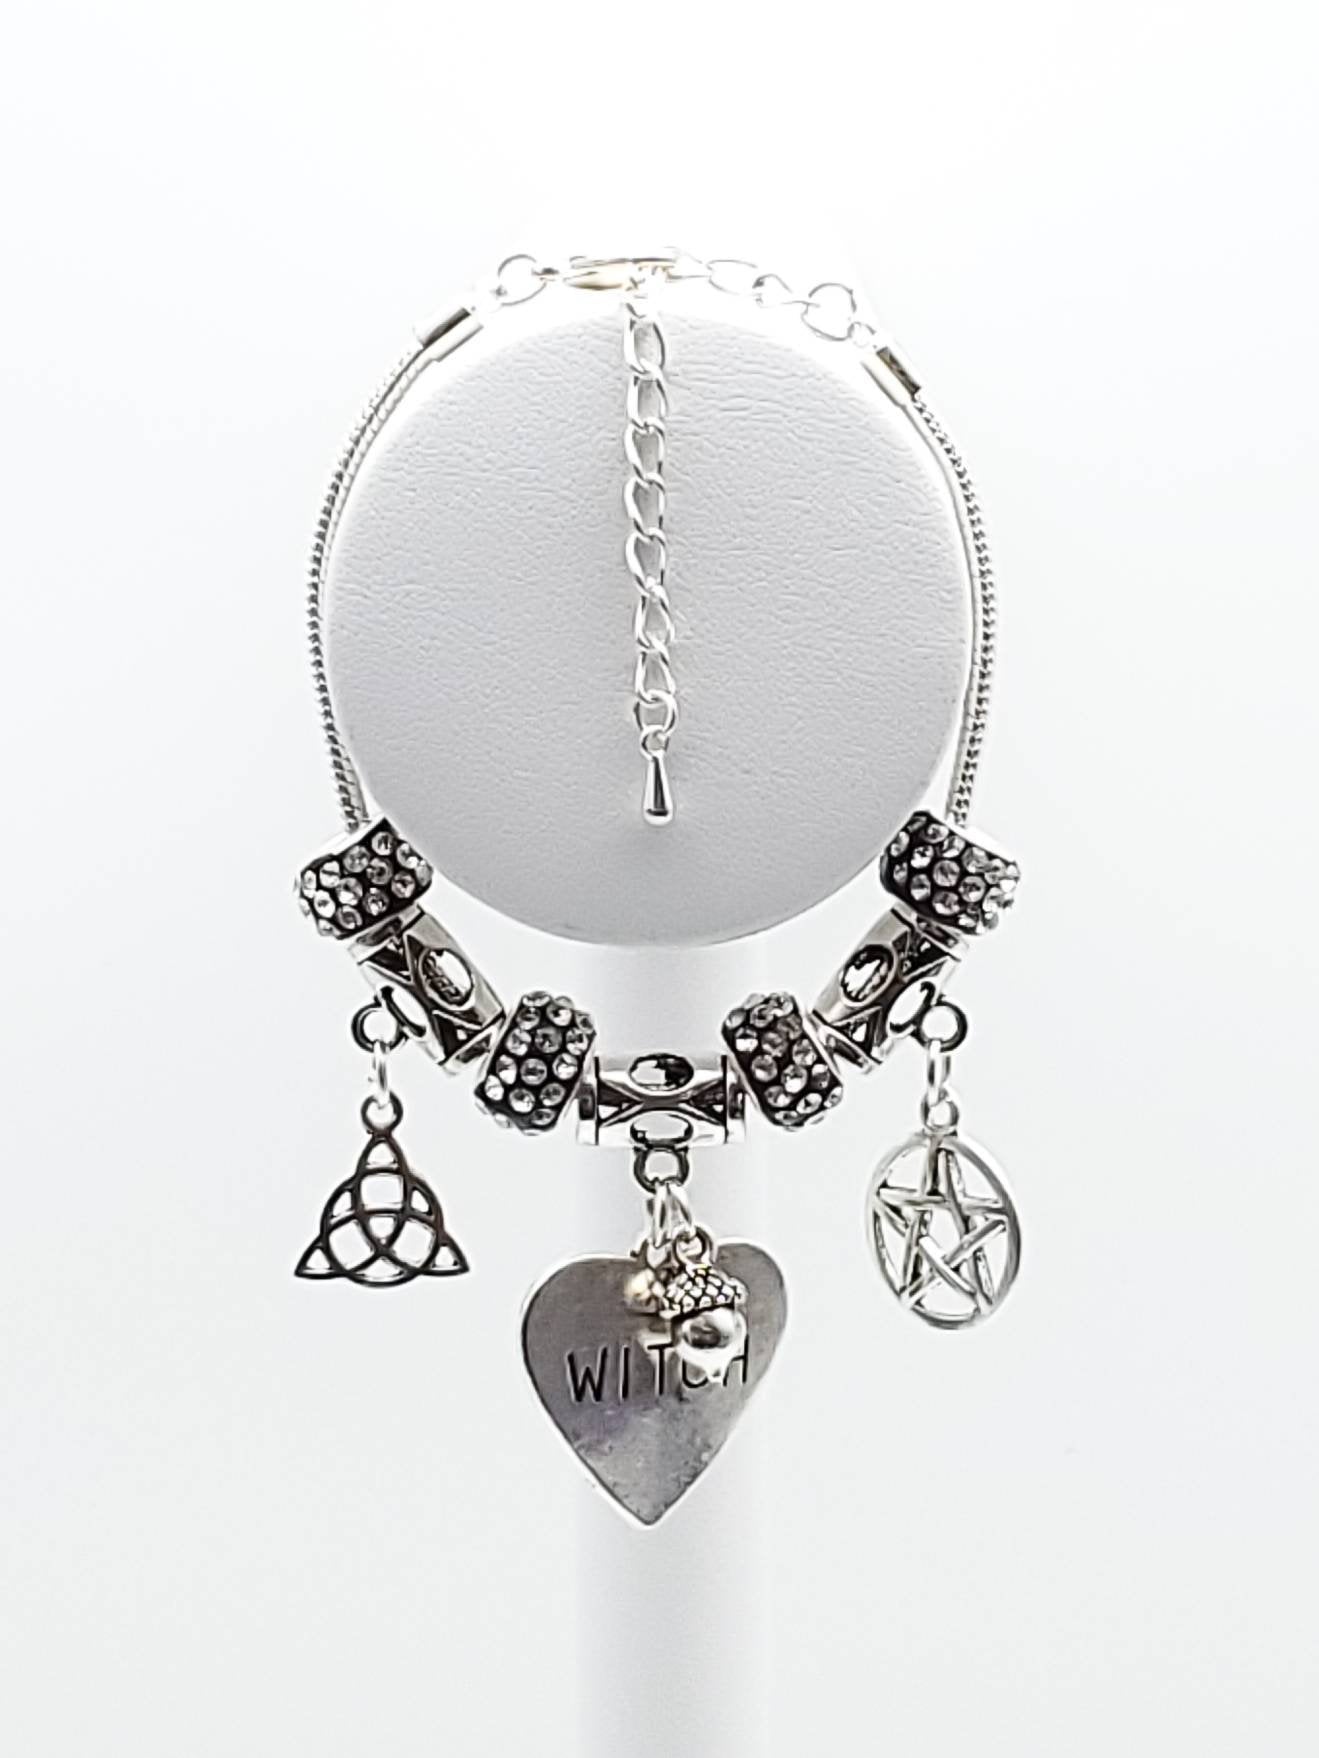 Charm Bracelet with Acorn, Triquera, Pentacle and WITCH Heart Charms - The Caffeinated Raven